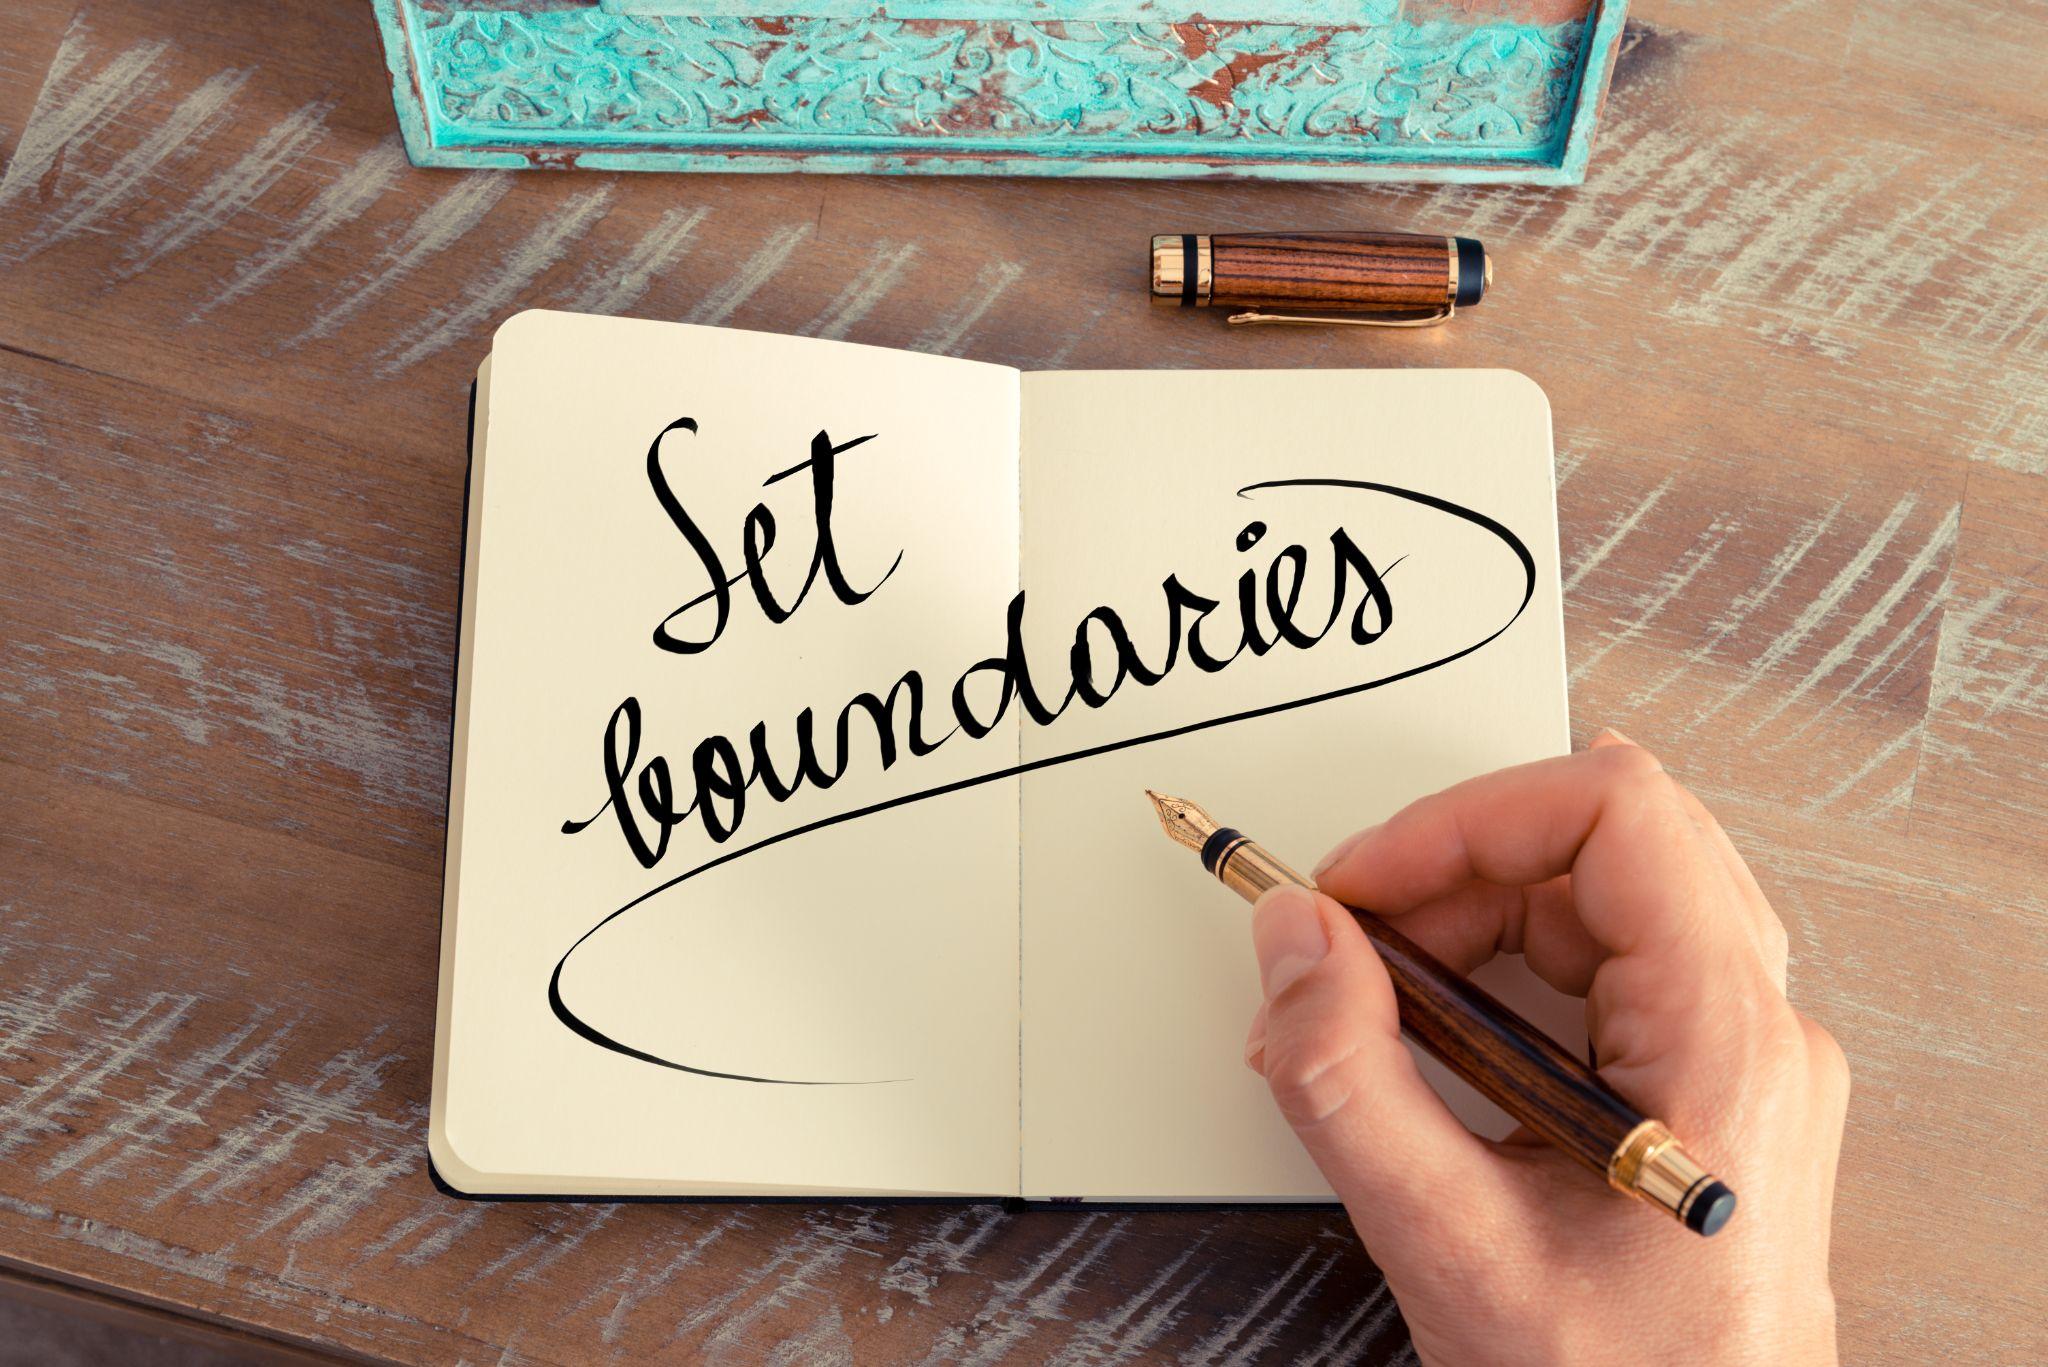 boundaries in recovery